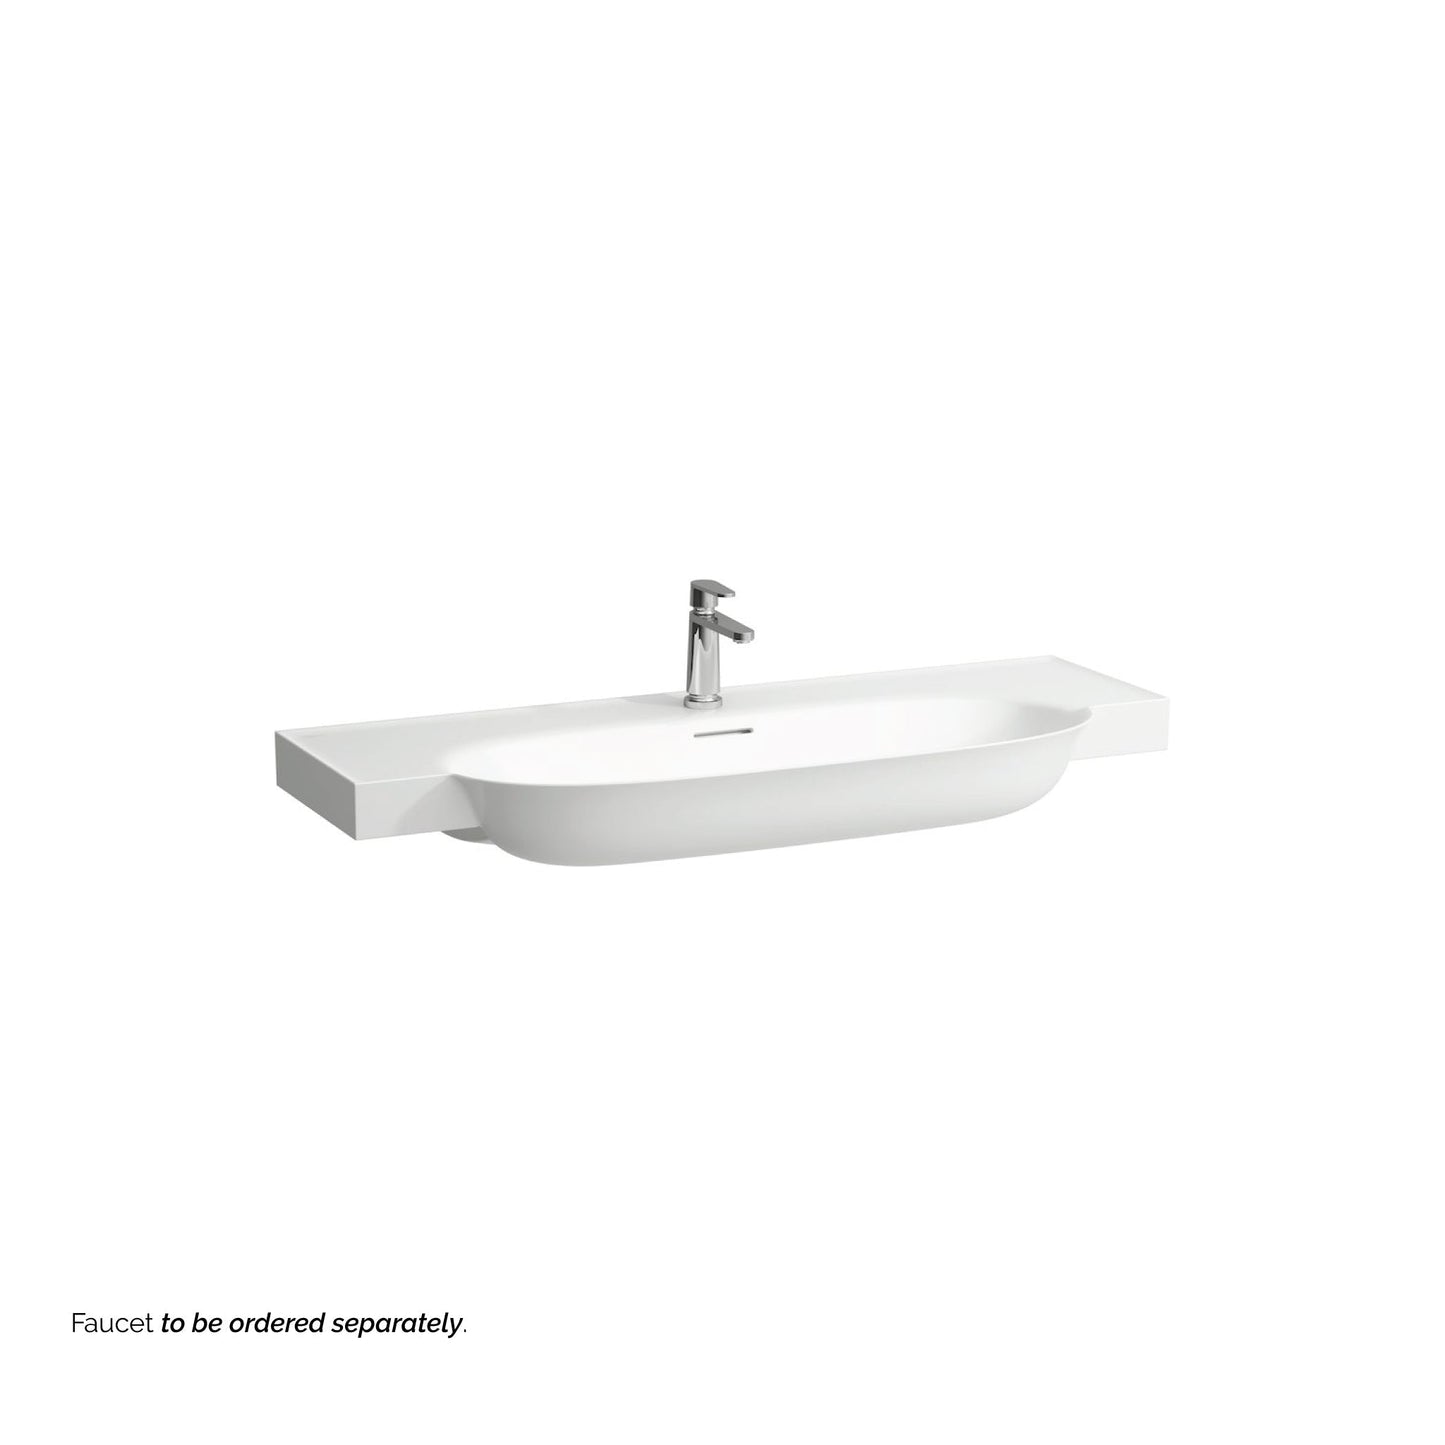 Laufen New Classic 47" x 19" White Ceramic Wall-Mounted Bathroom Sink With Faucet Hole